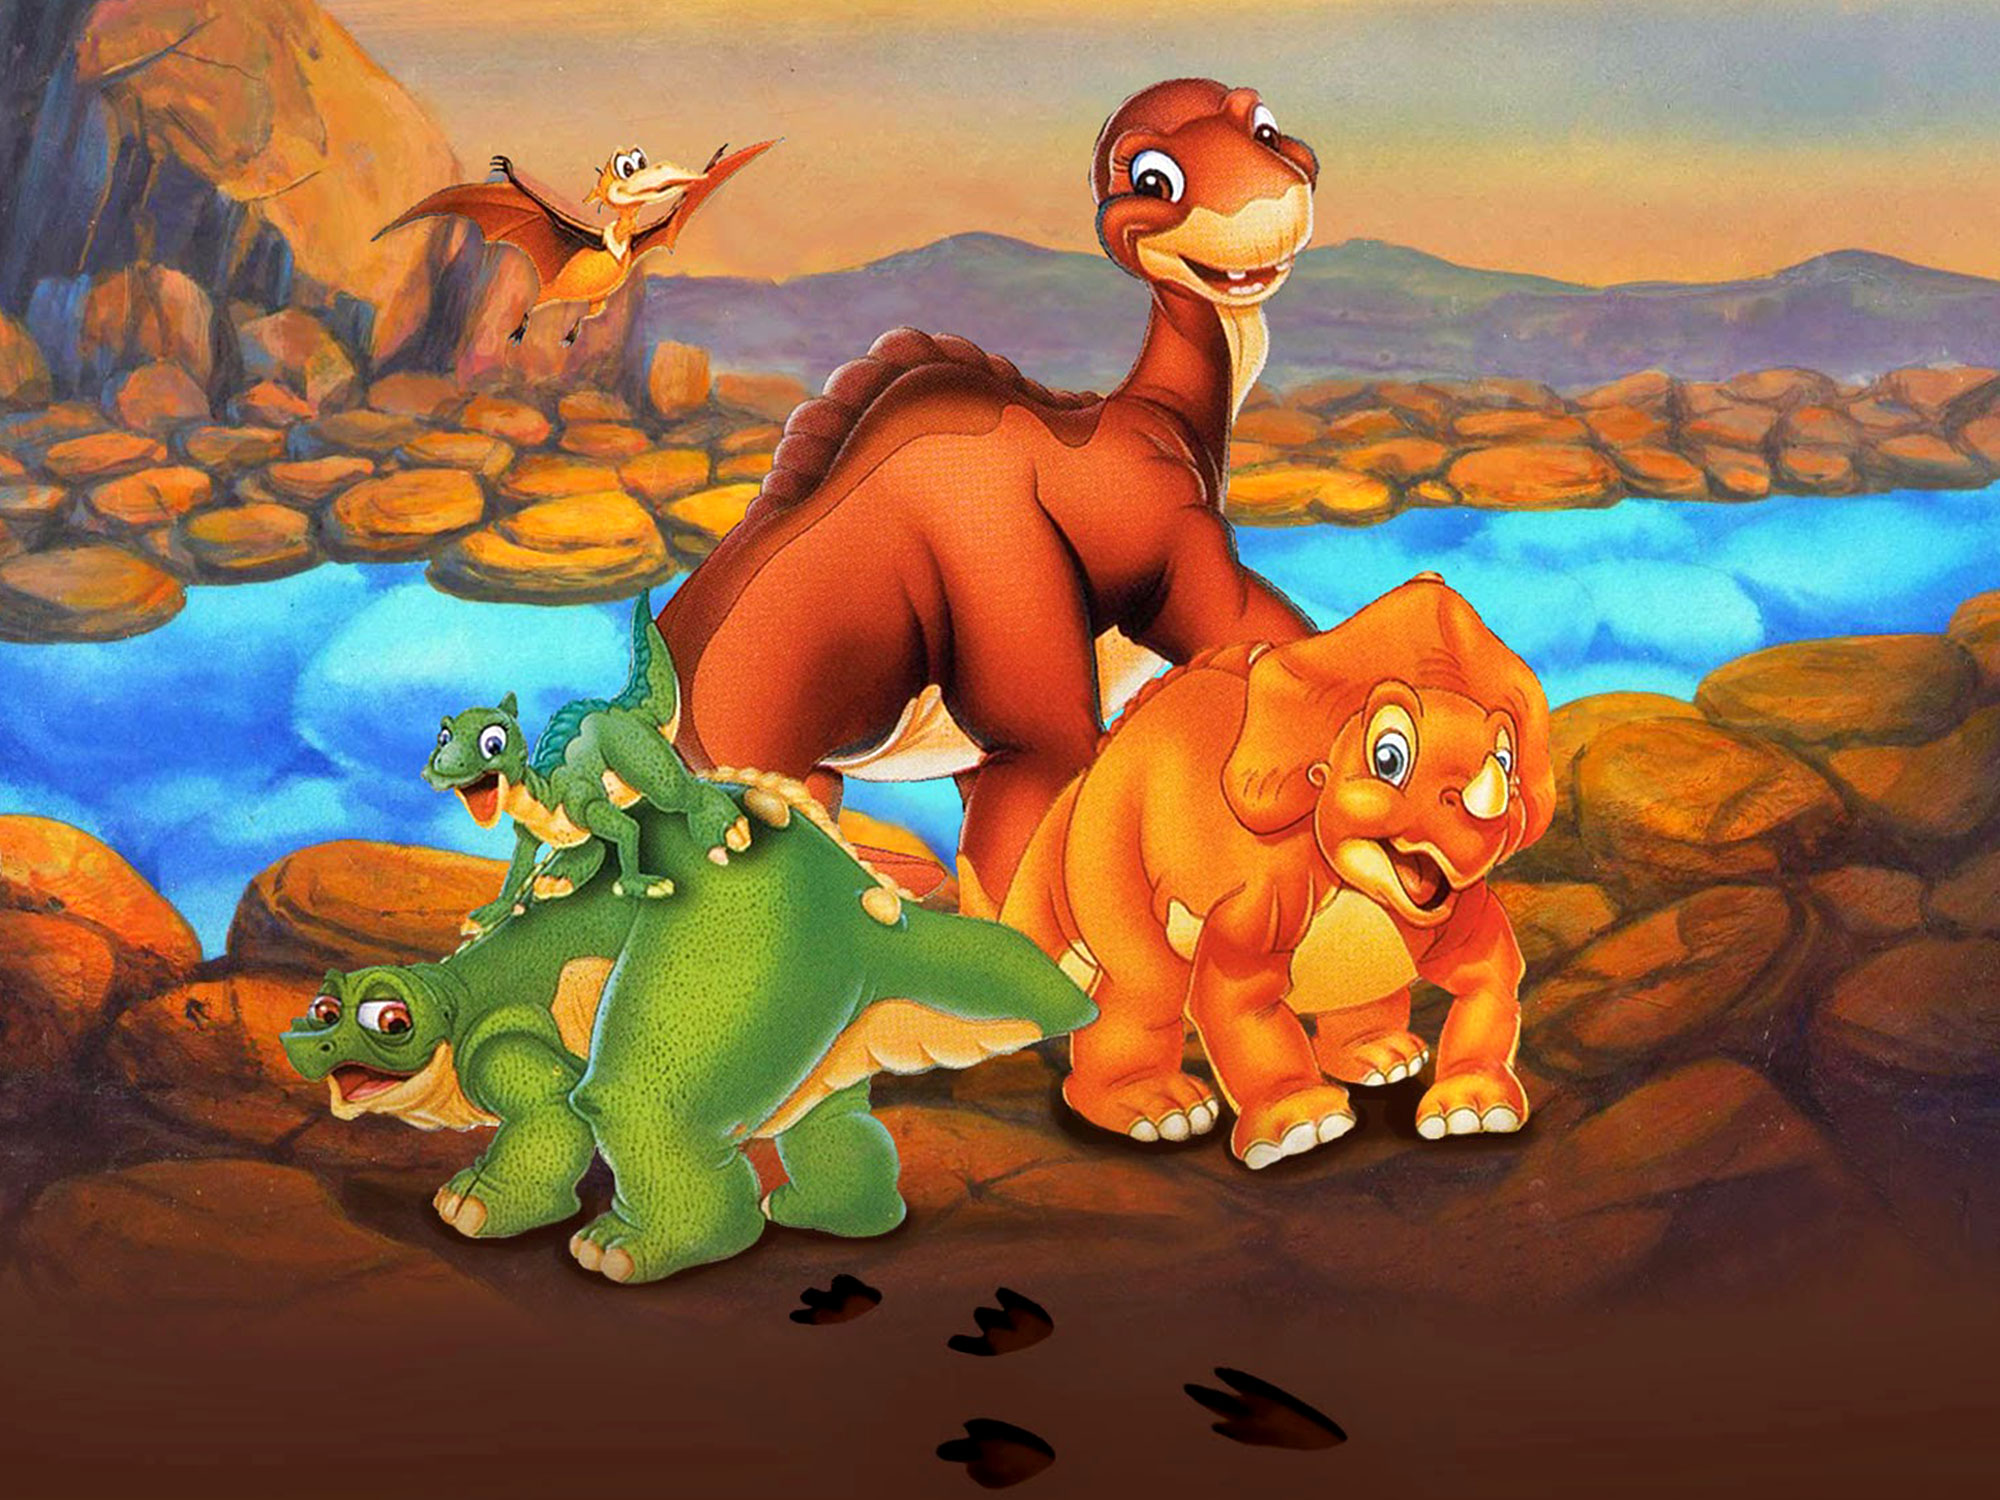 Little foot characters